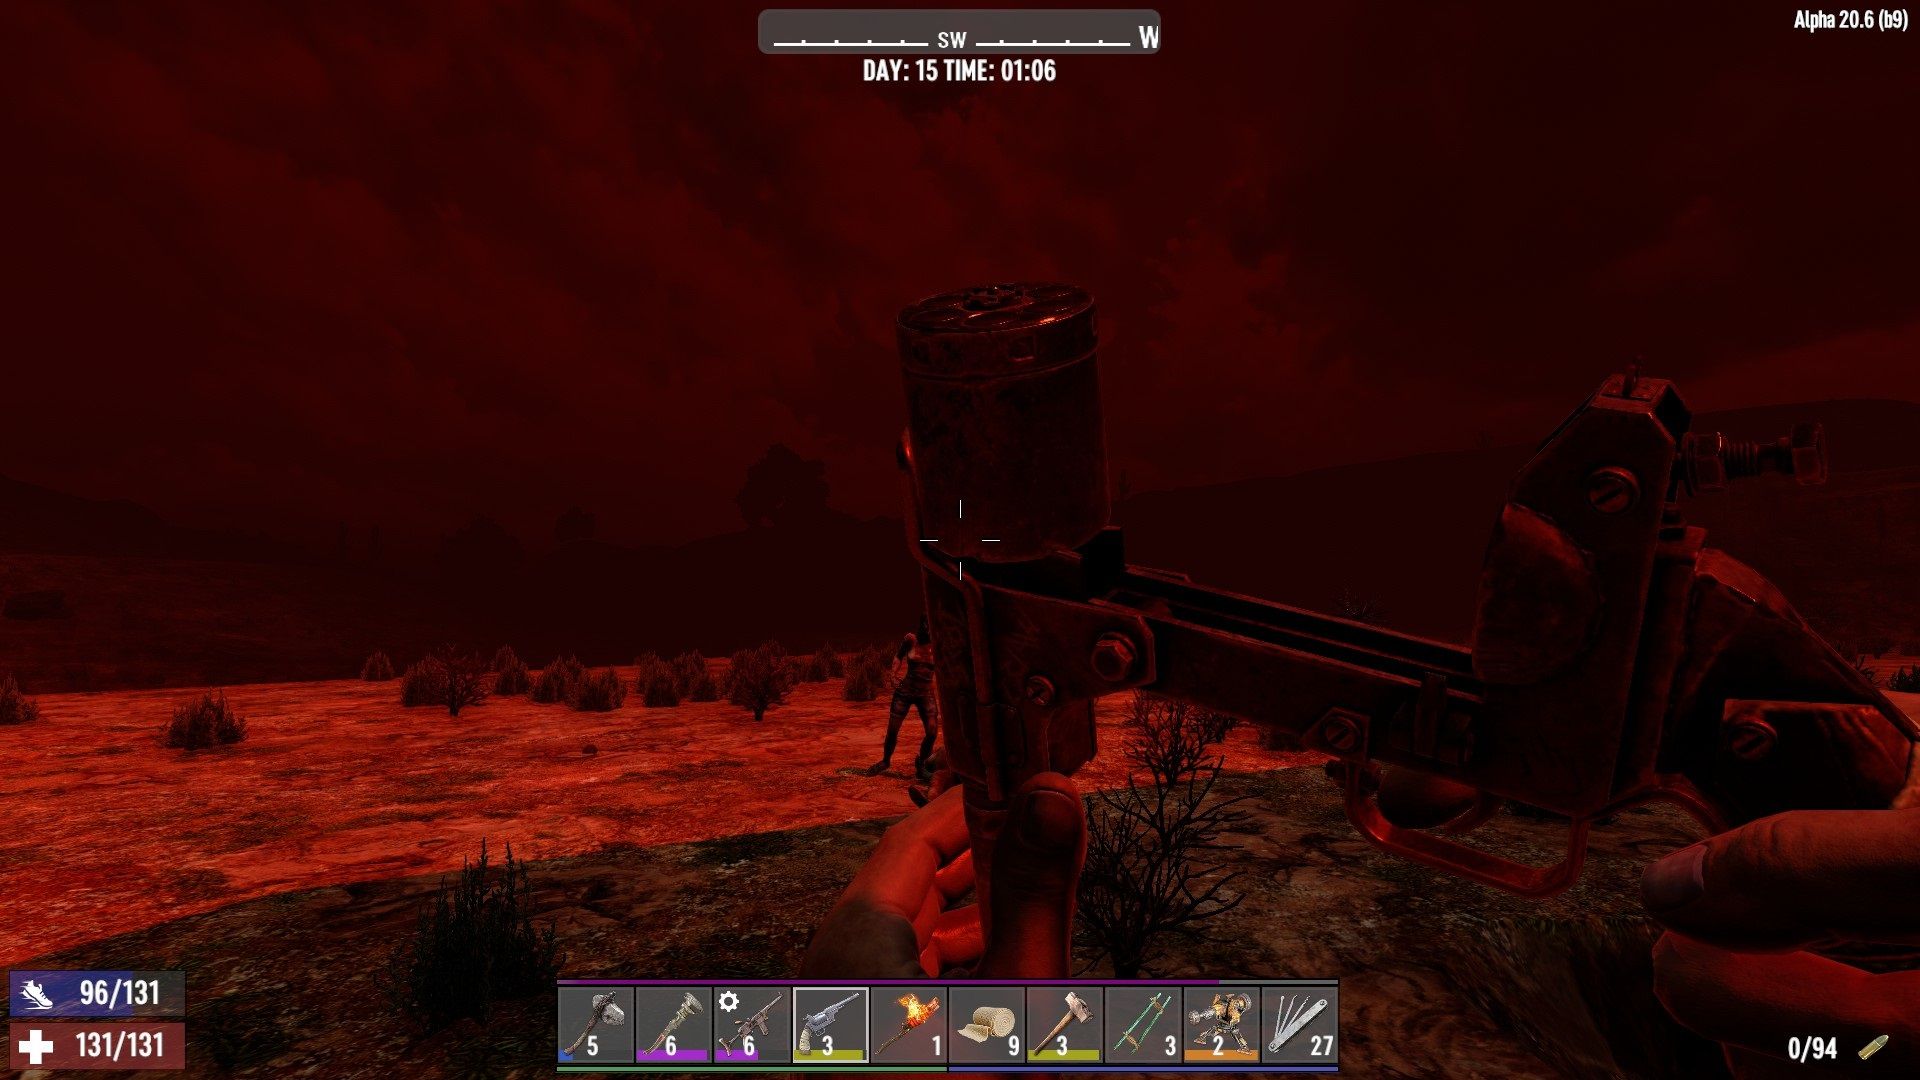 cleaning up some zombies with a pistol 7 days to die.jpg